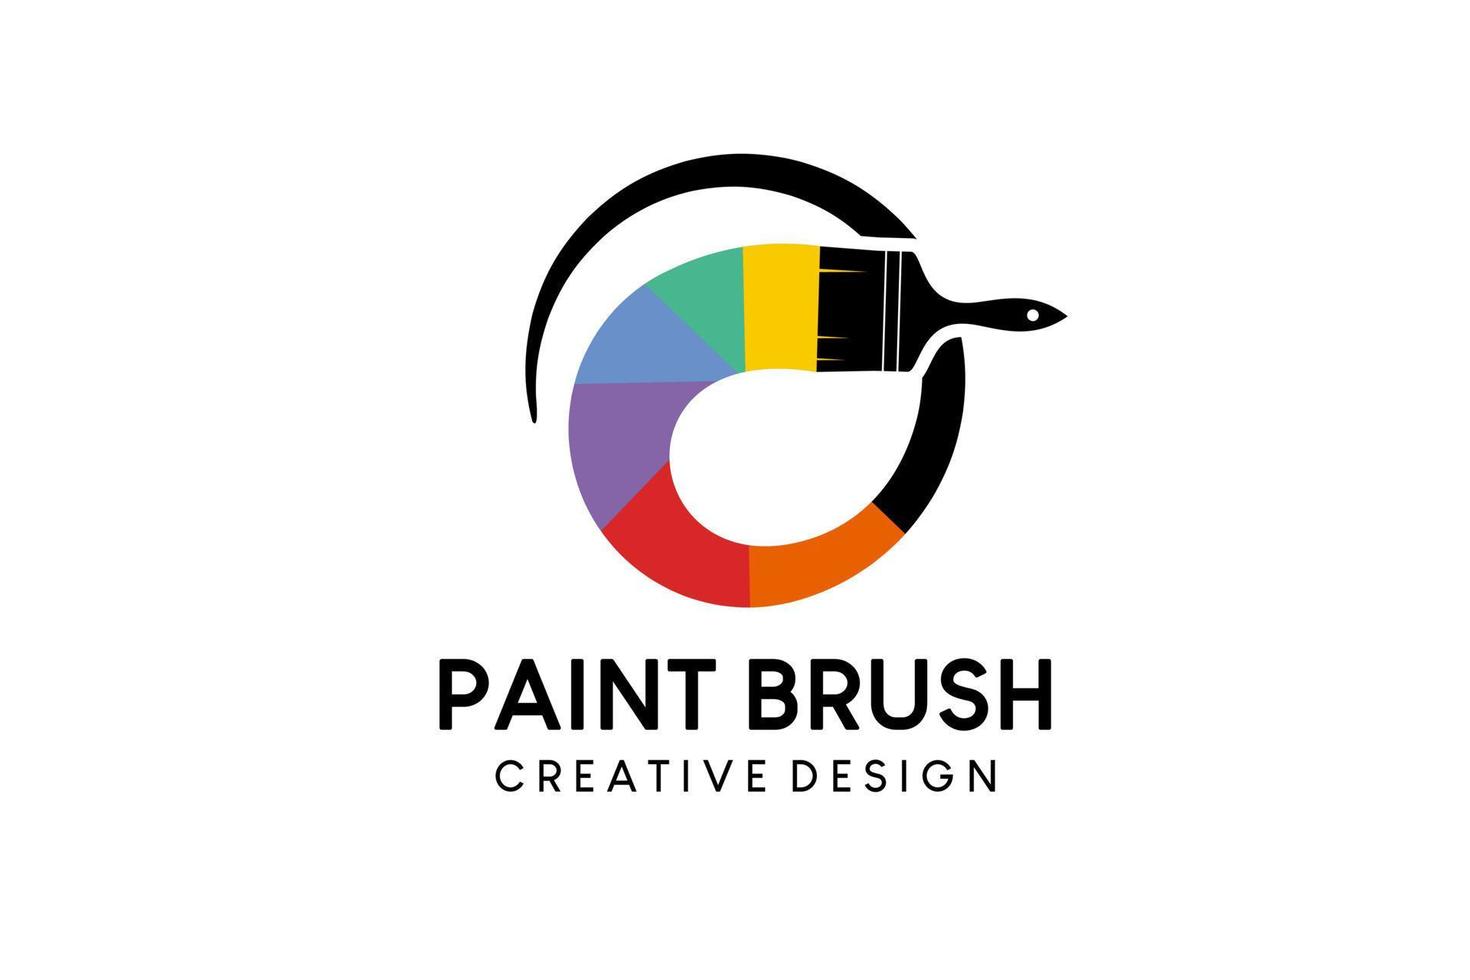 Paint brush logo design in creative abstract style vector